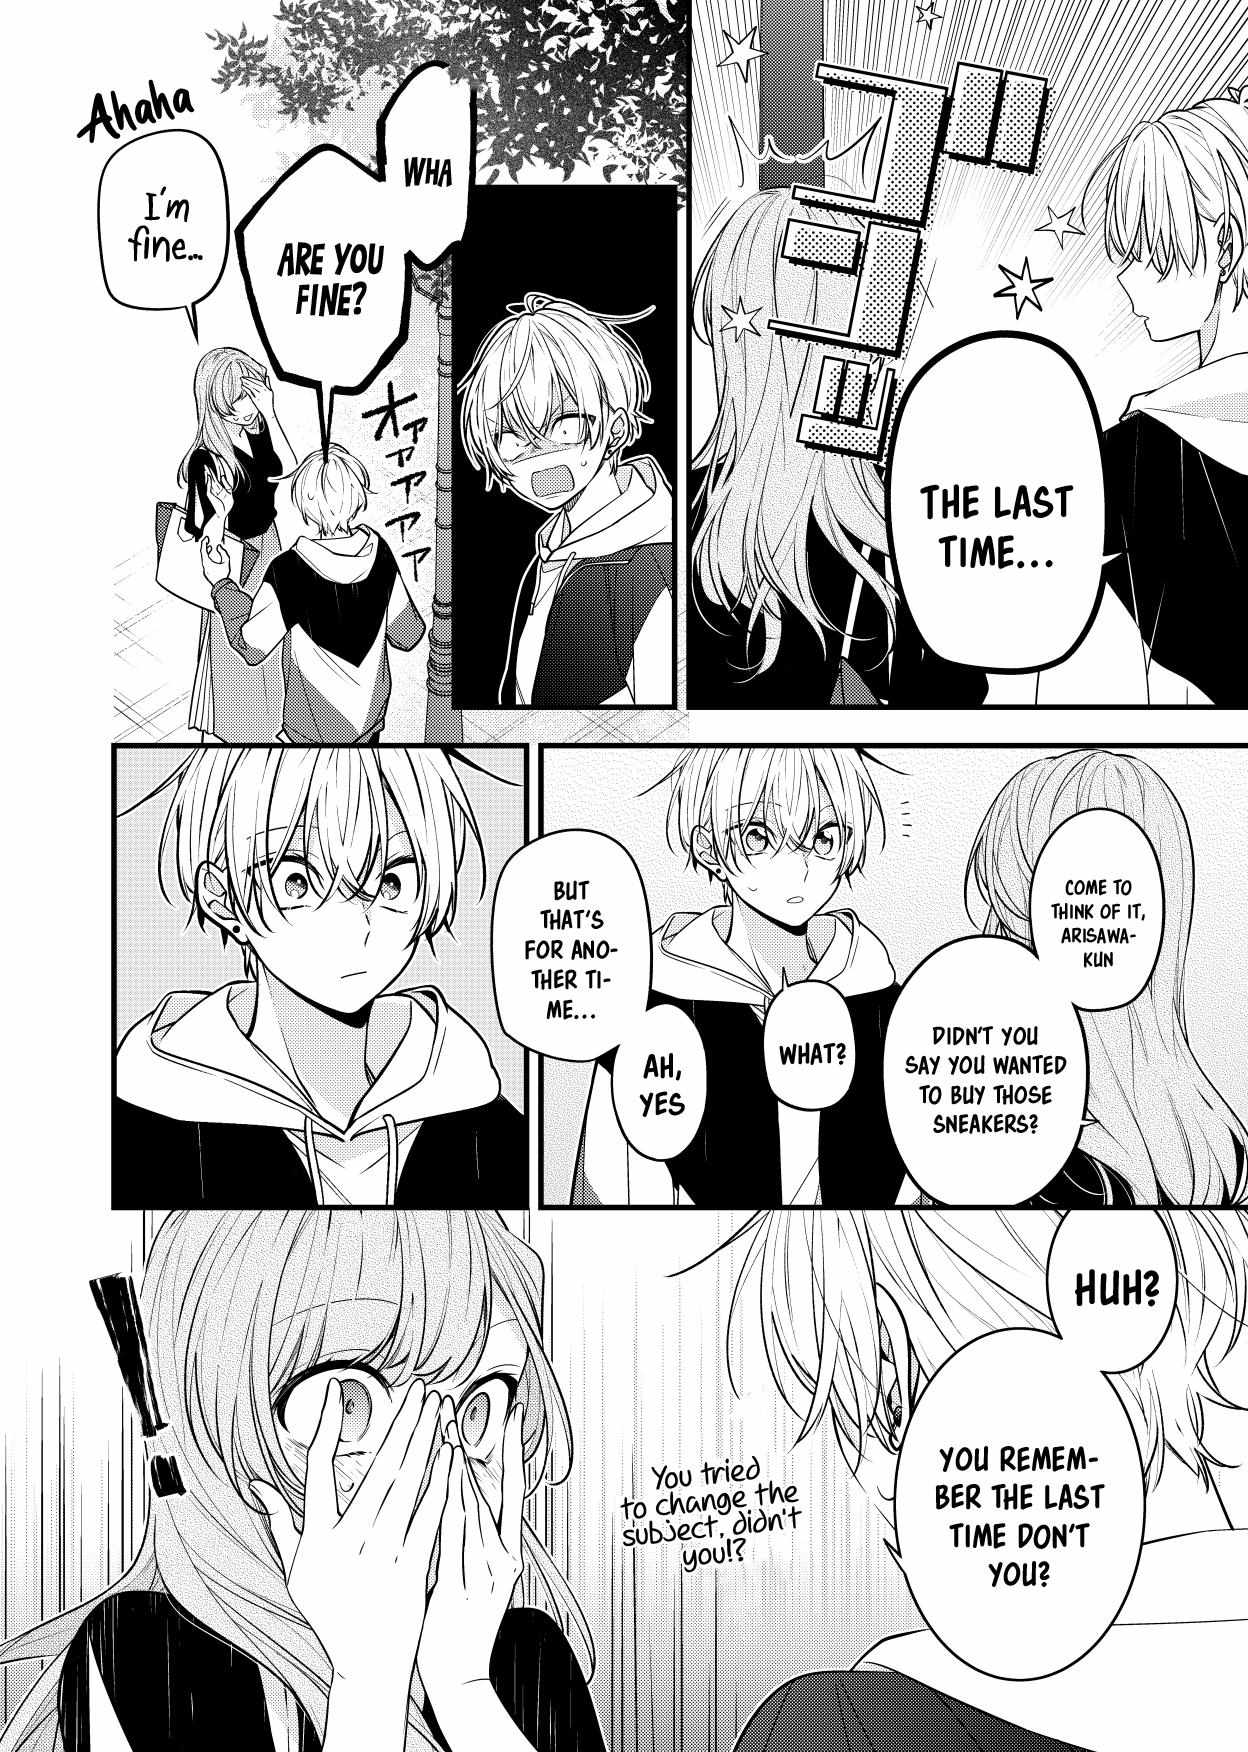 The Story Of A Guy Who Fell In Love With His Friend's Sister - 18 page 3-1453fa2b